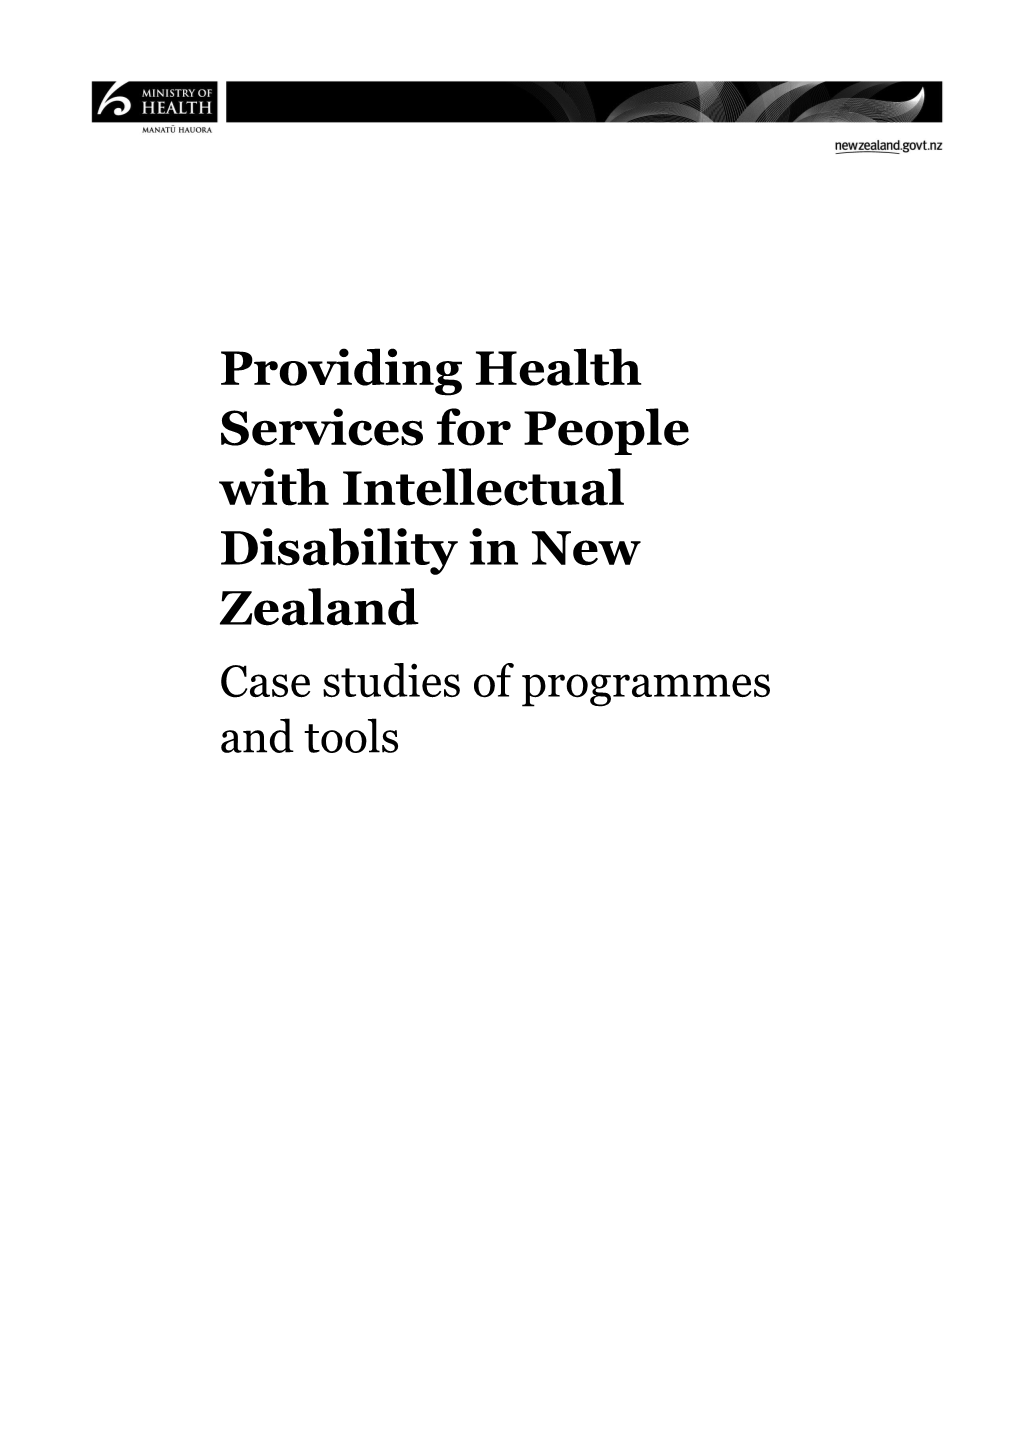 Providing Health Services for People with Intellectual Disability: Case Studies of Programmes